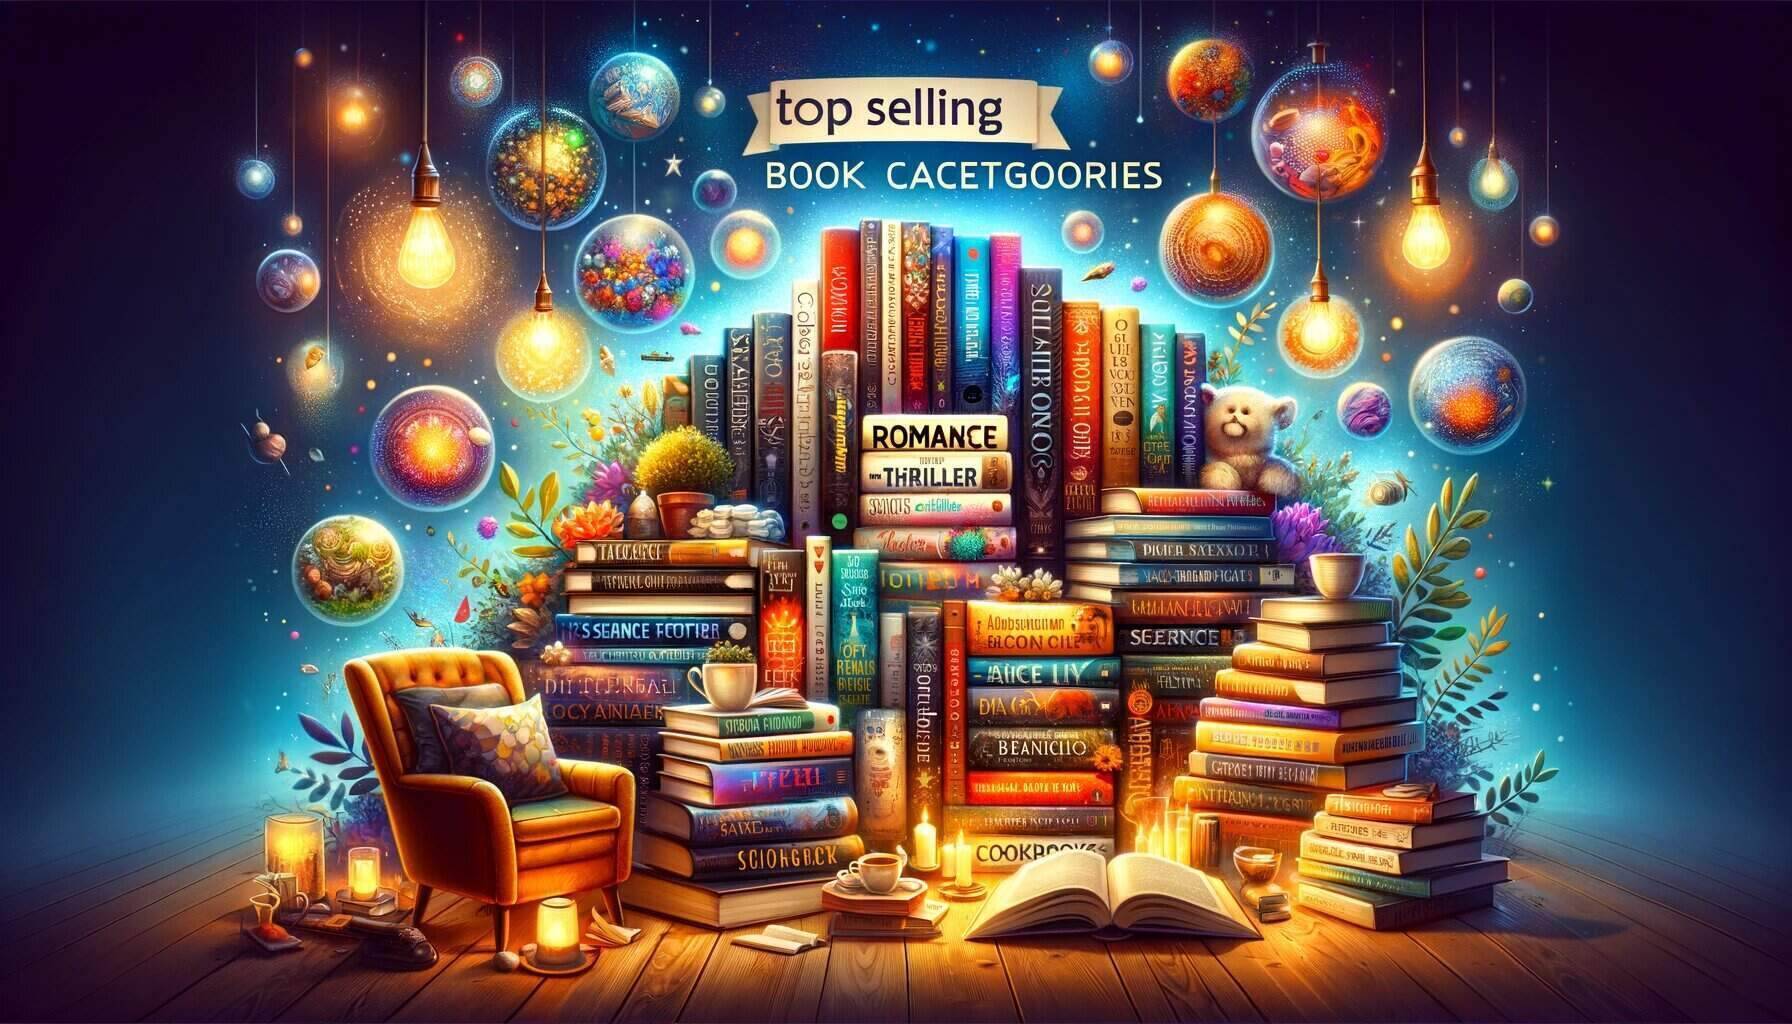 Top Selling Book Categories on Amazon